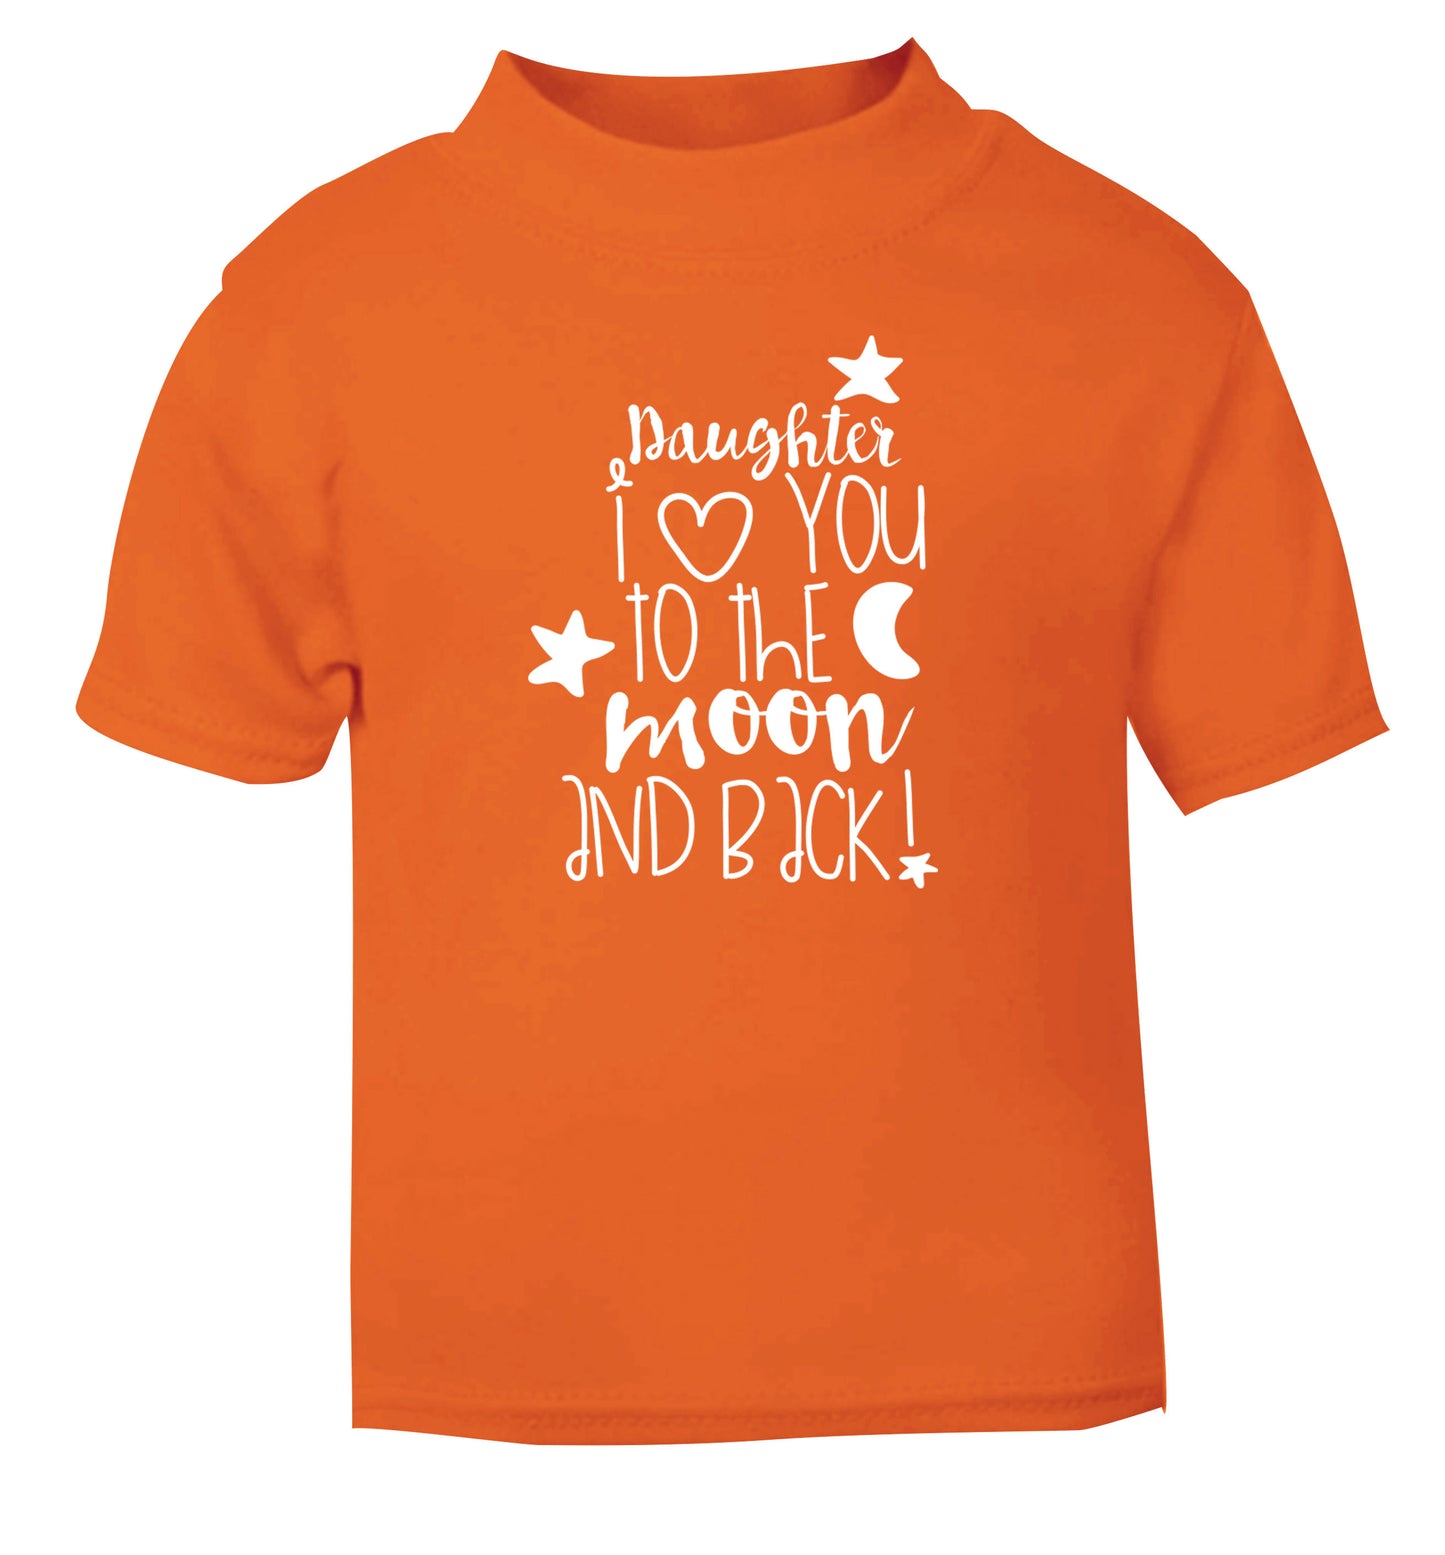 Daughter I love you to the moon and back orange Baby Toddler Tshirt 2 Years